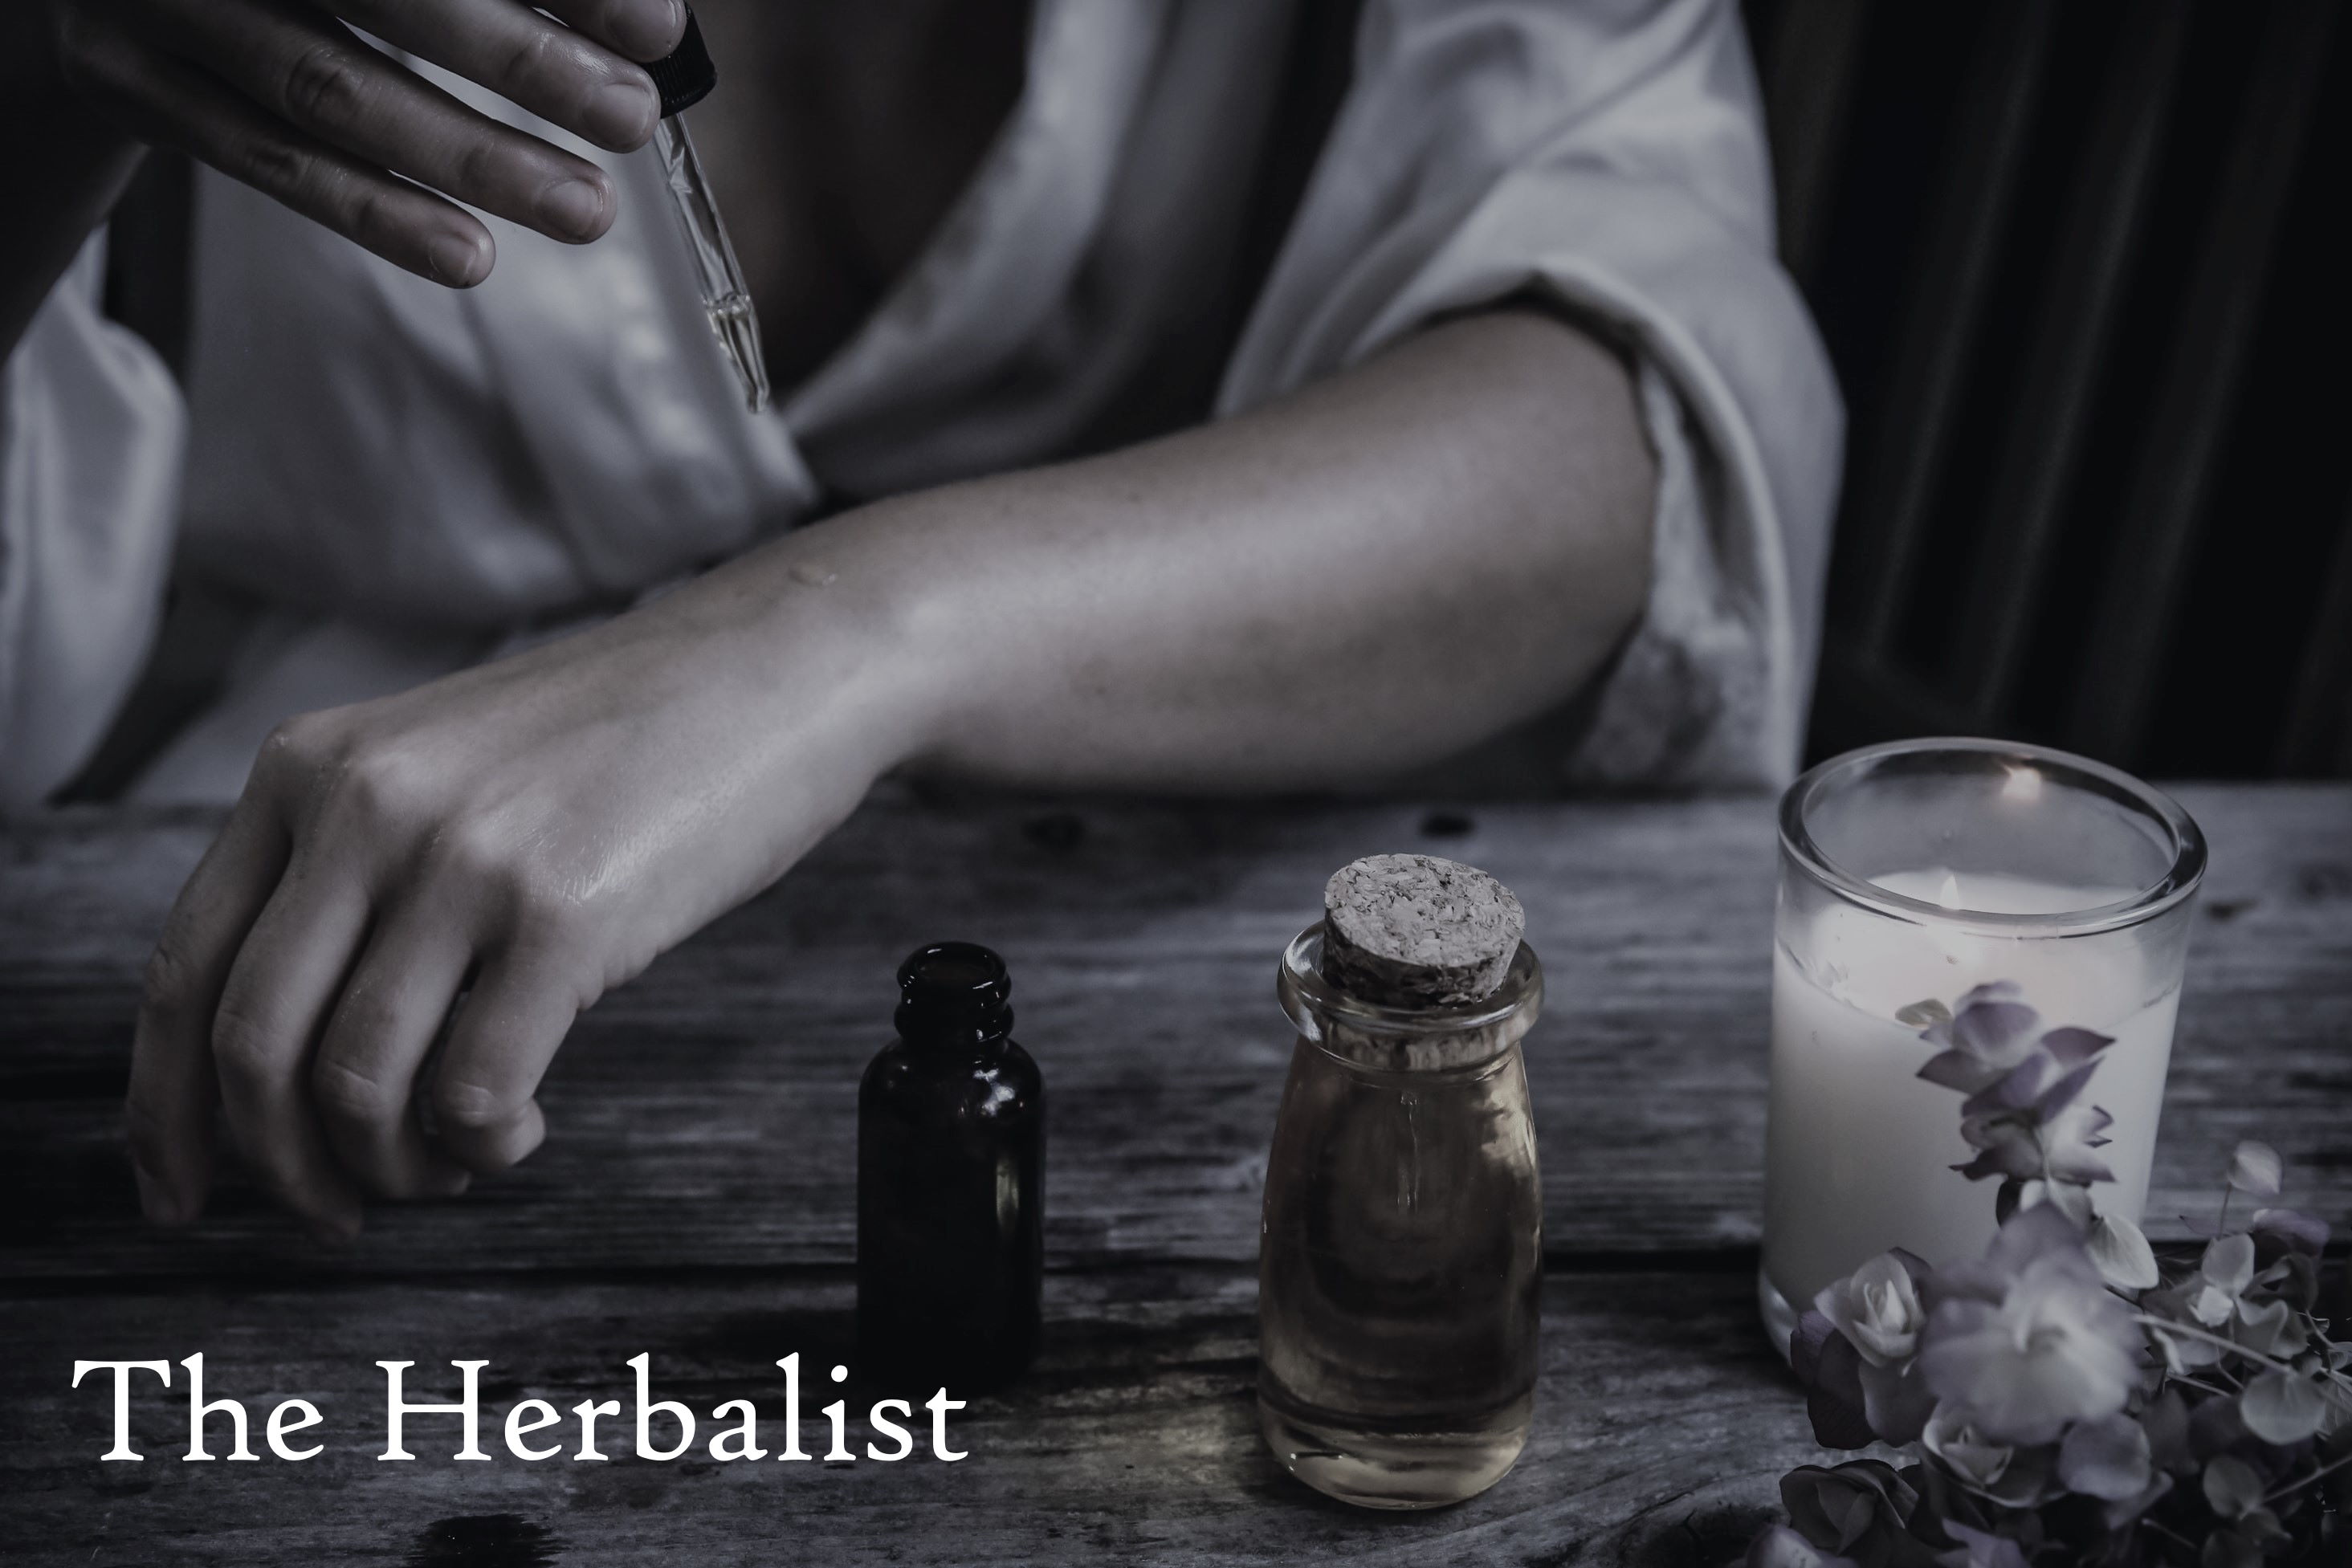 Herbalist - A Lay On Hands Archetype